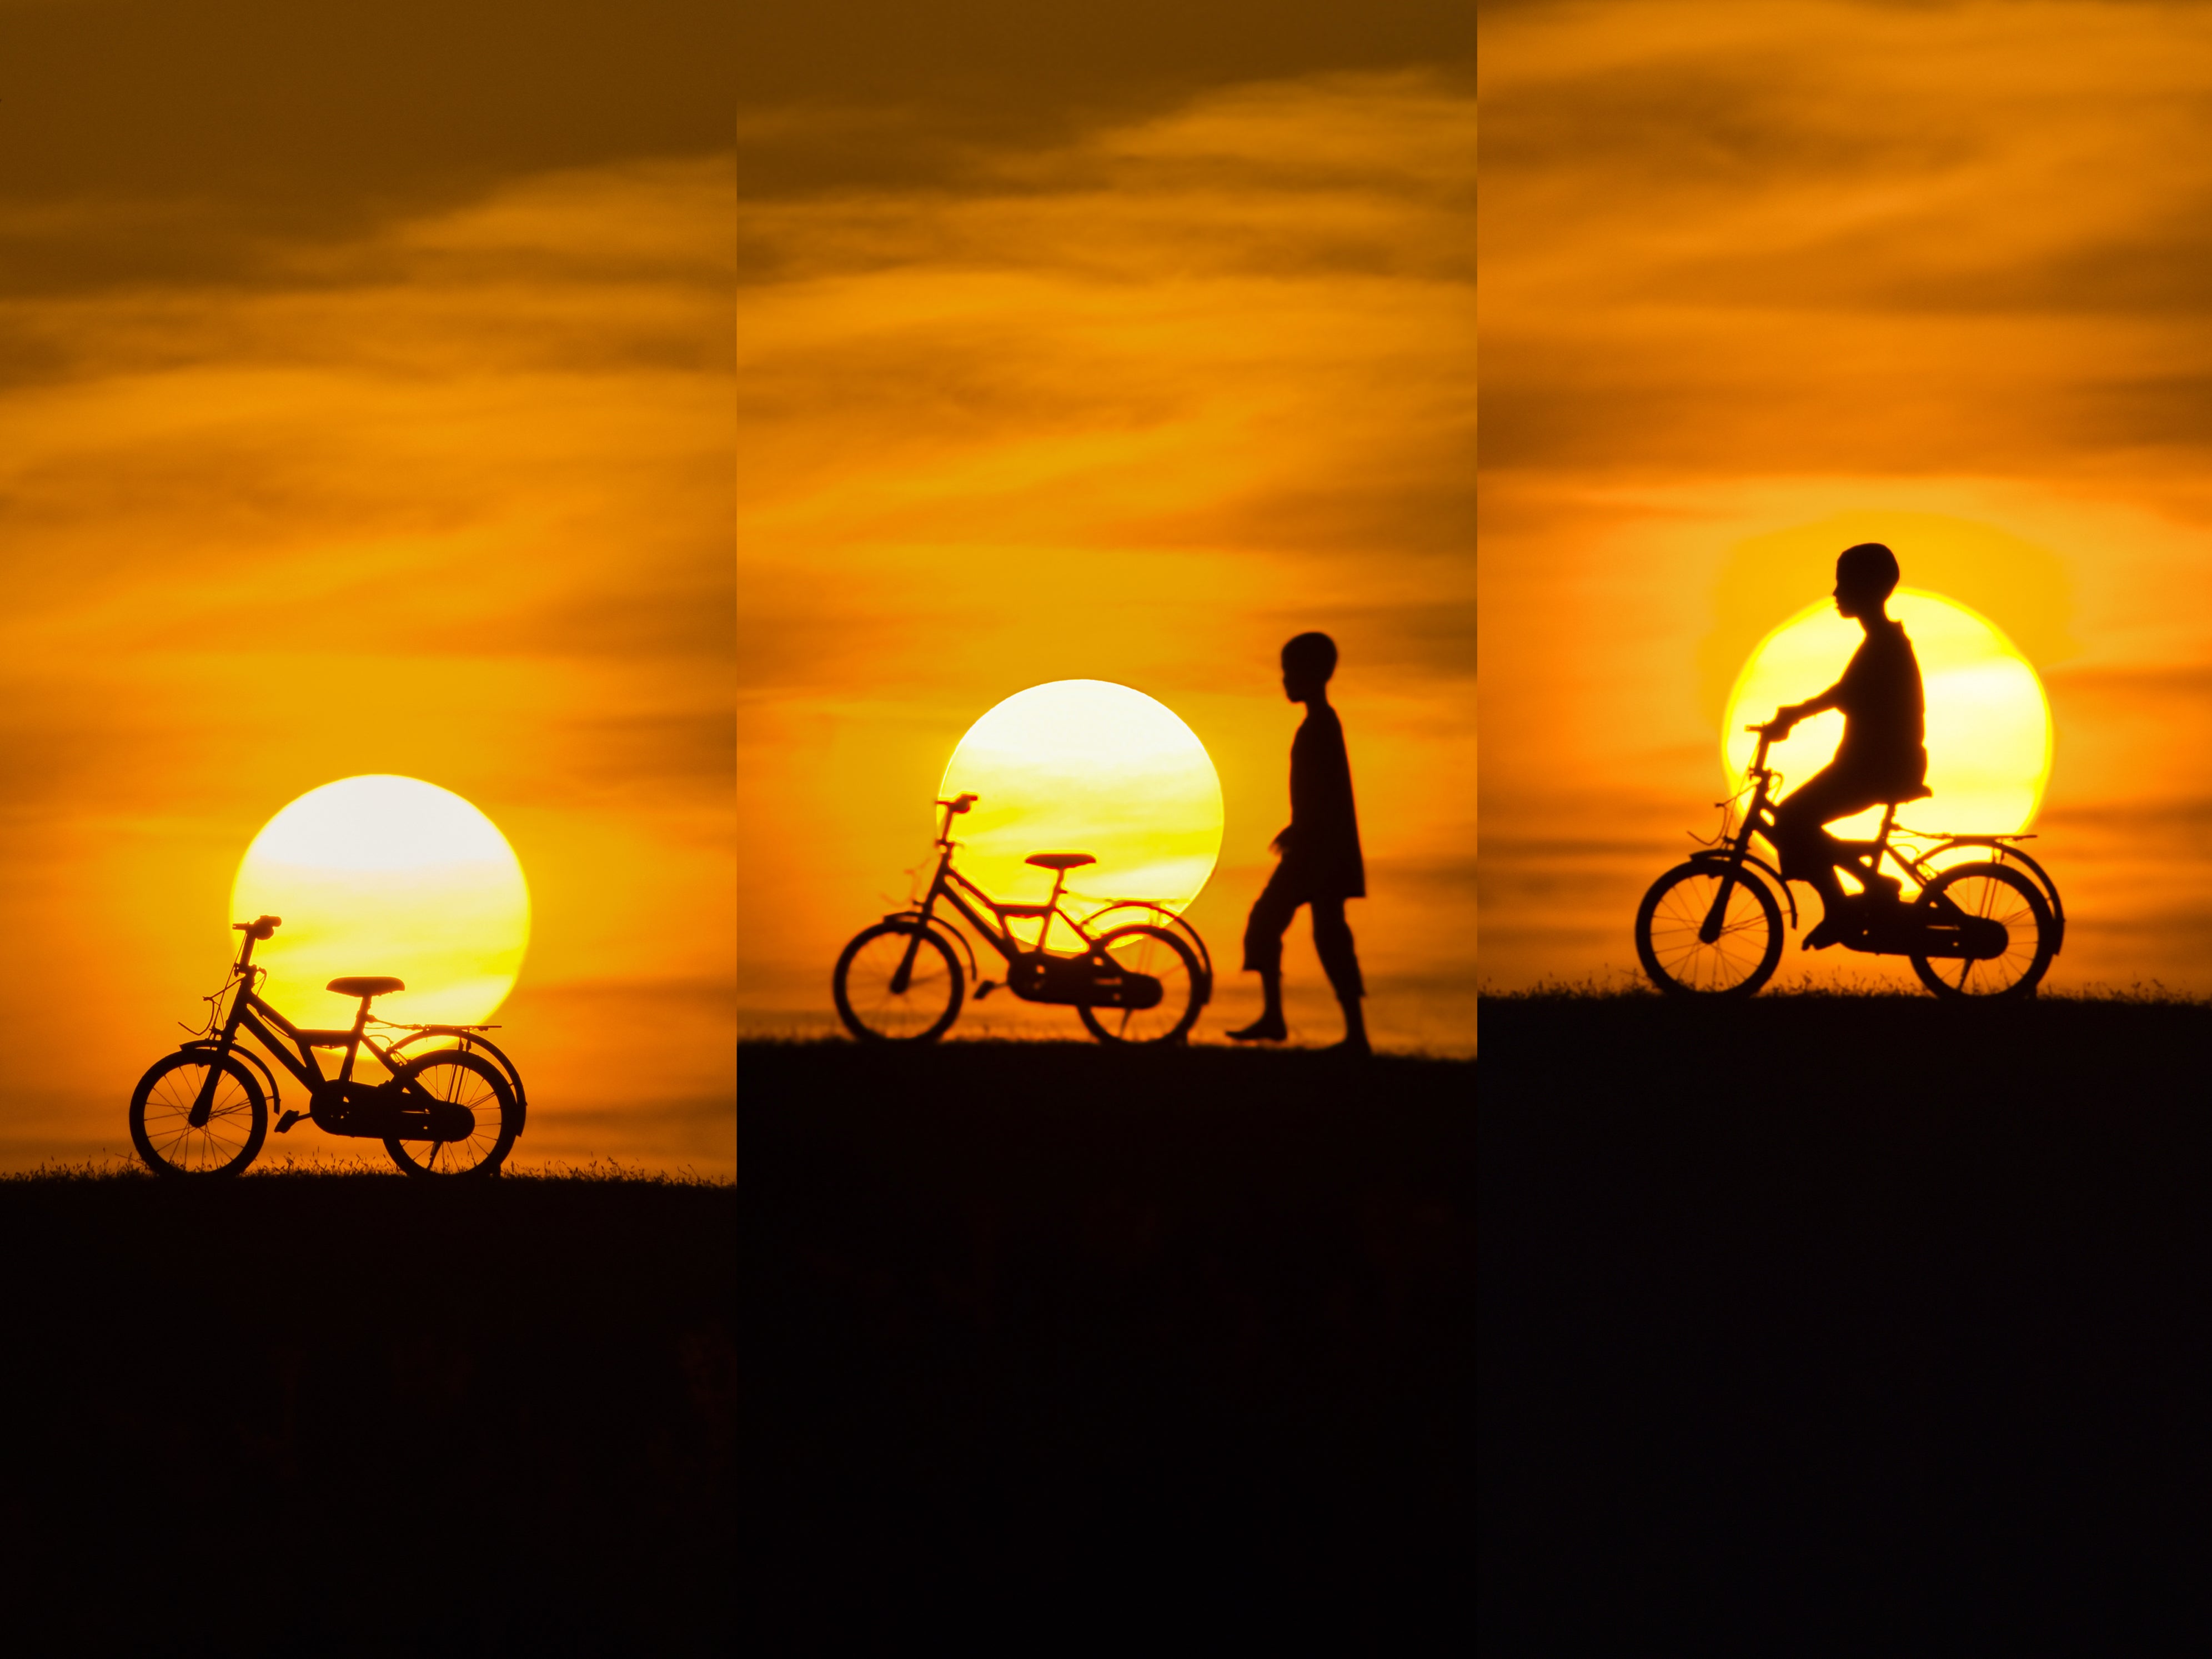 Silhouette Photography: The Art of Capturing Cool Silhouettes